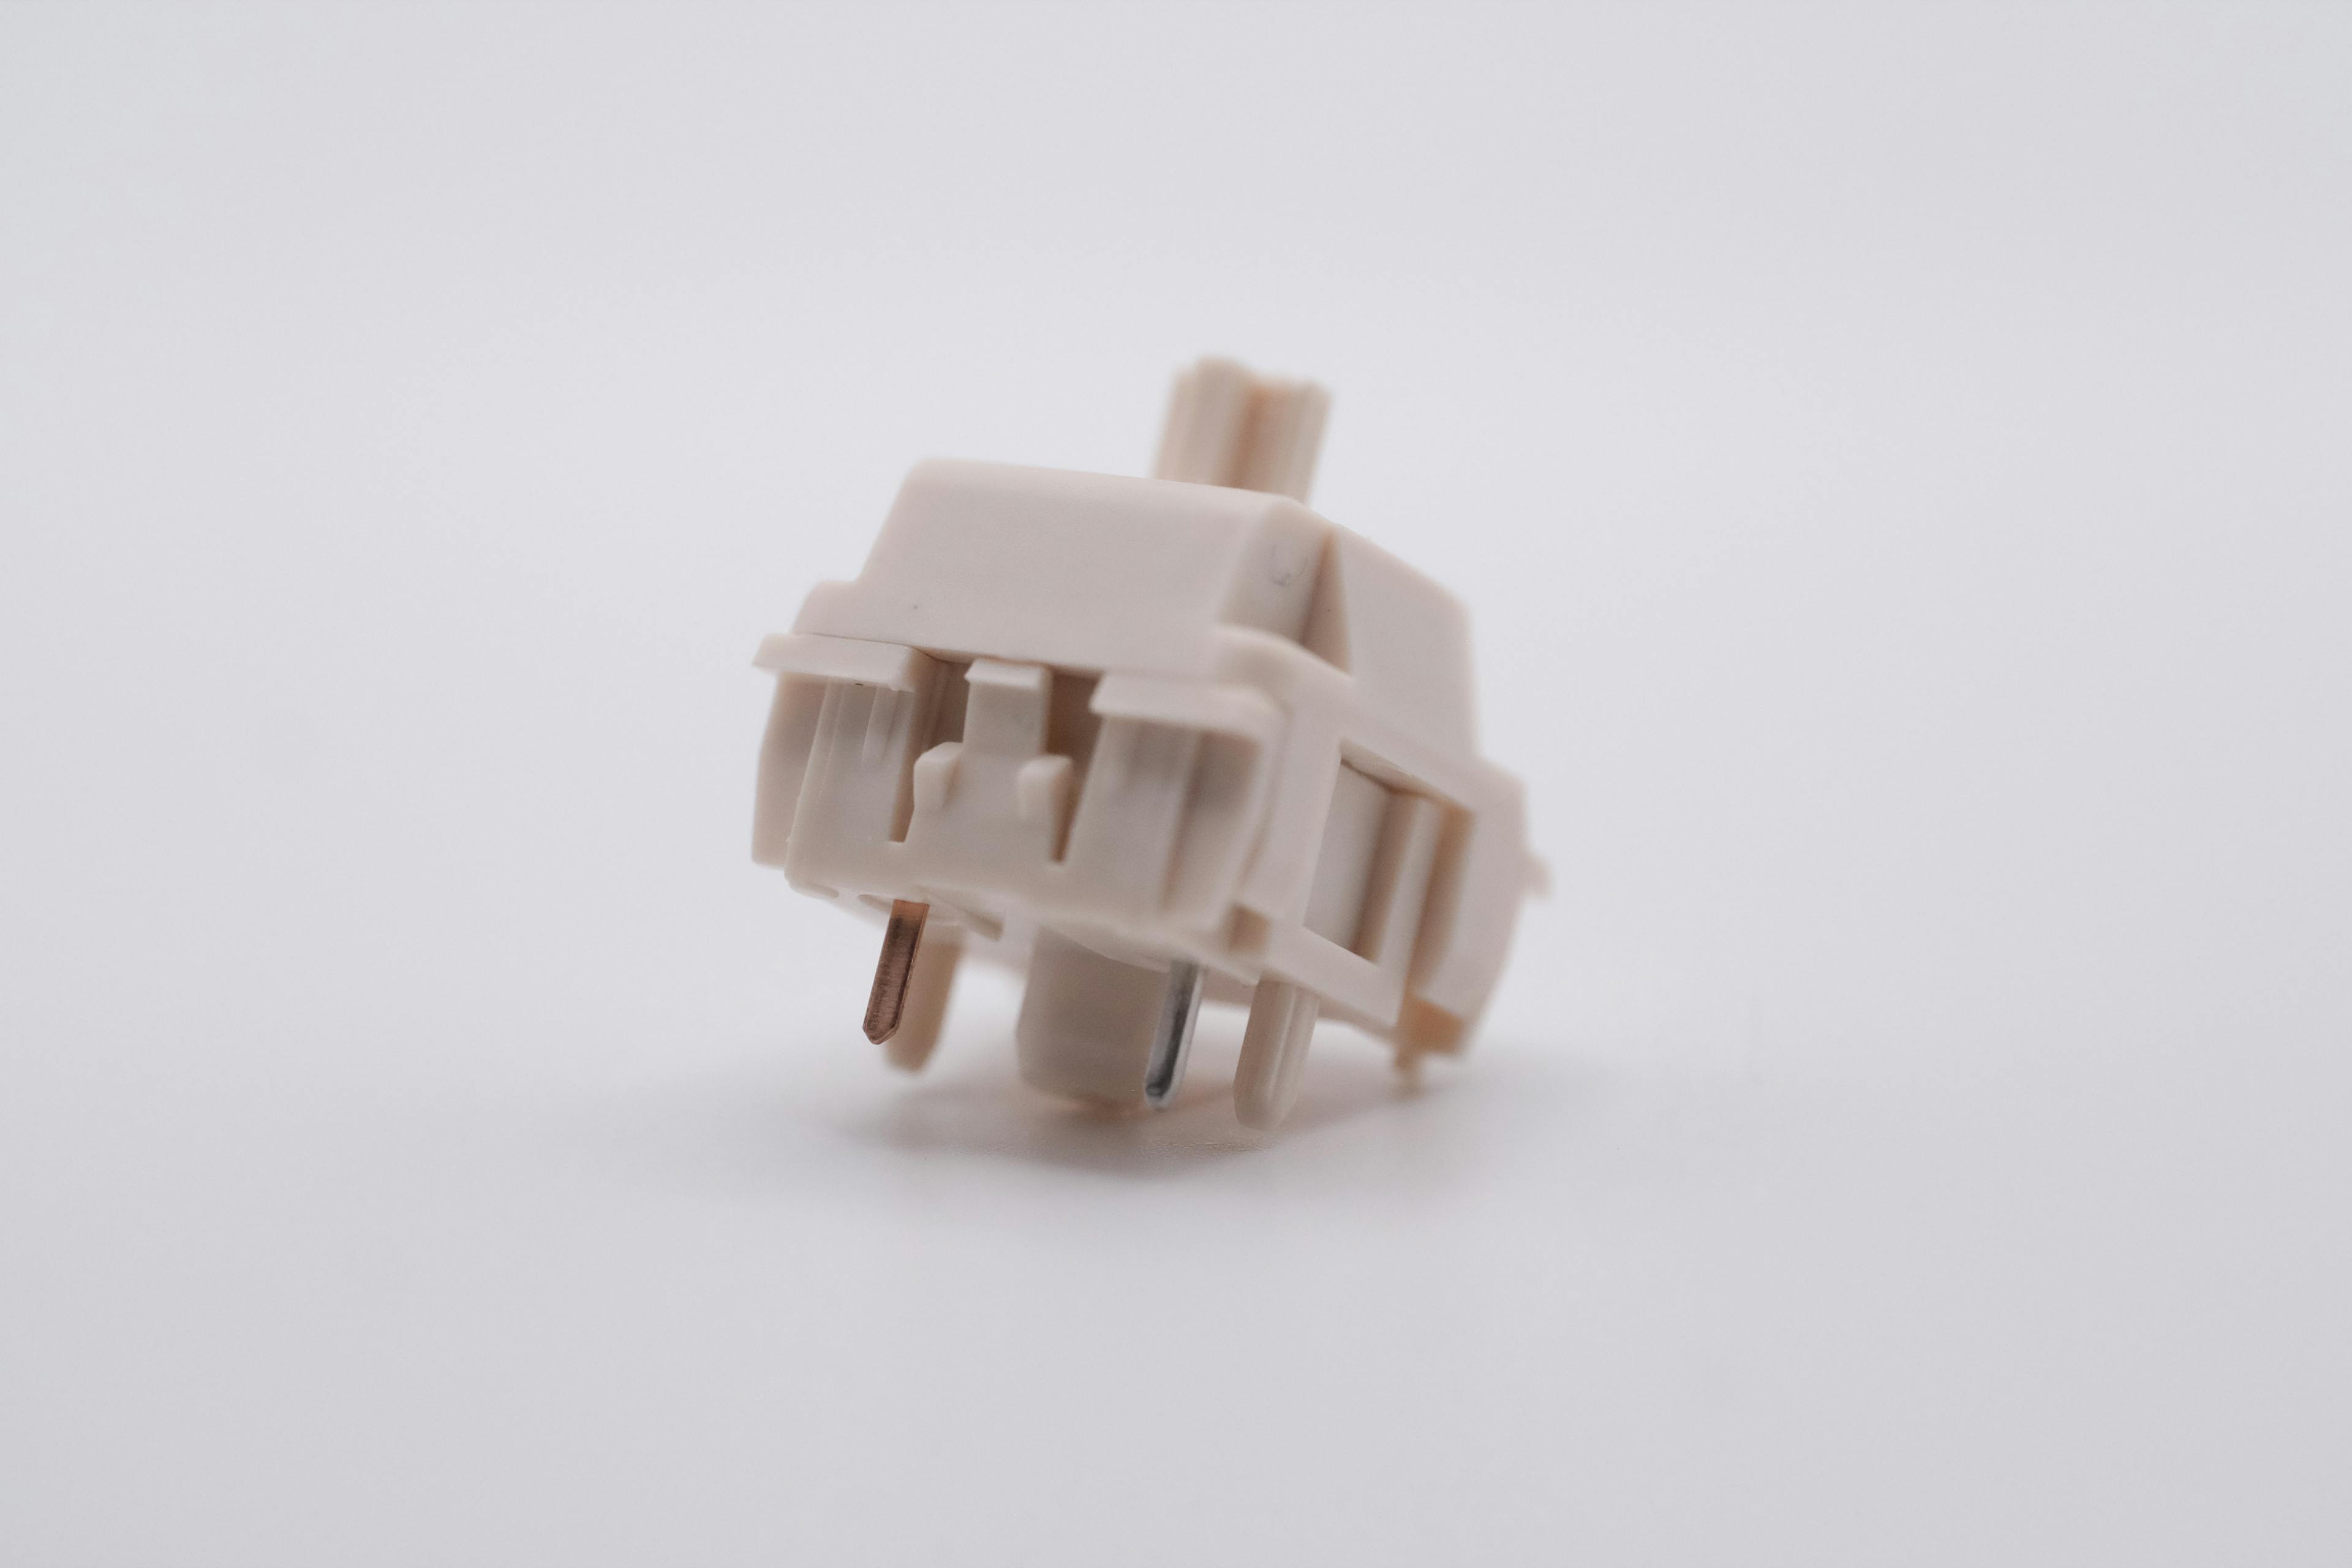 Kailh NovelKeys Cream Linear Switches